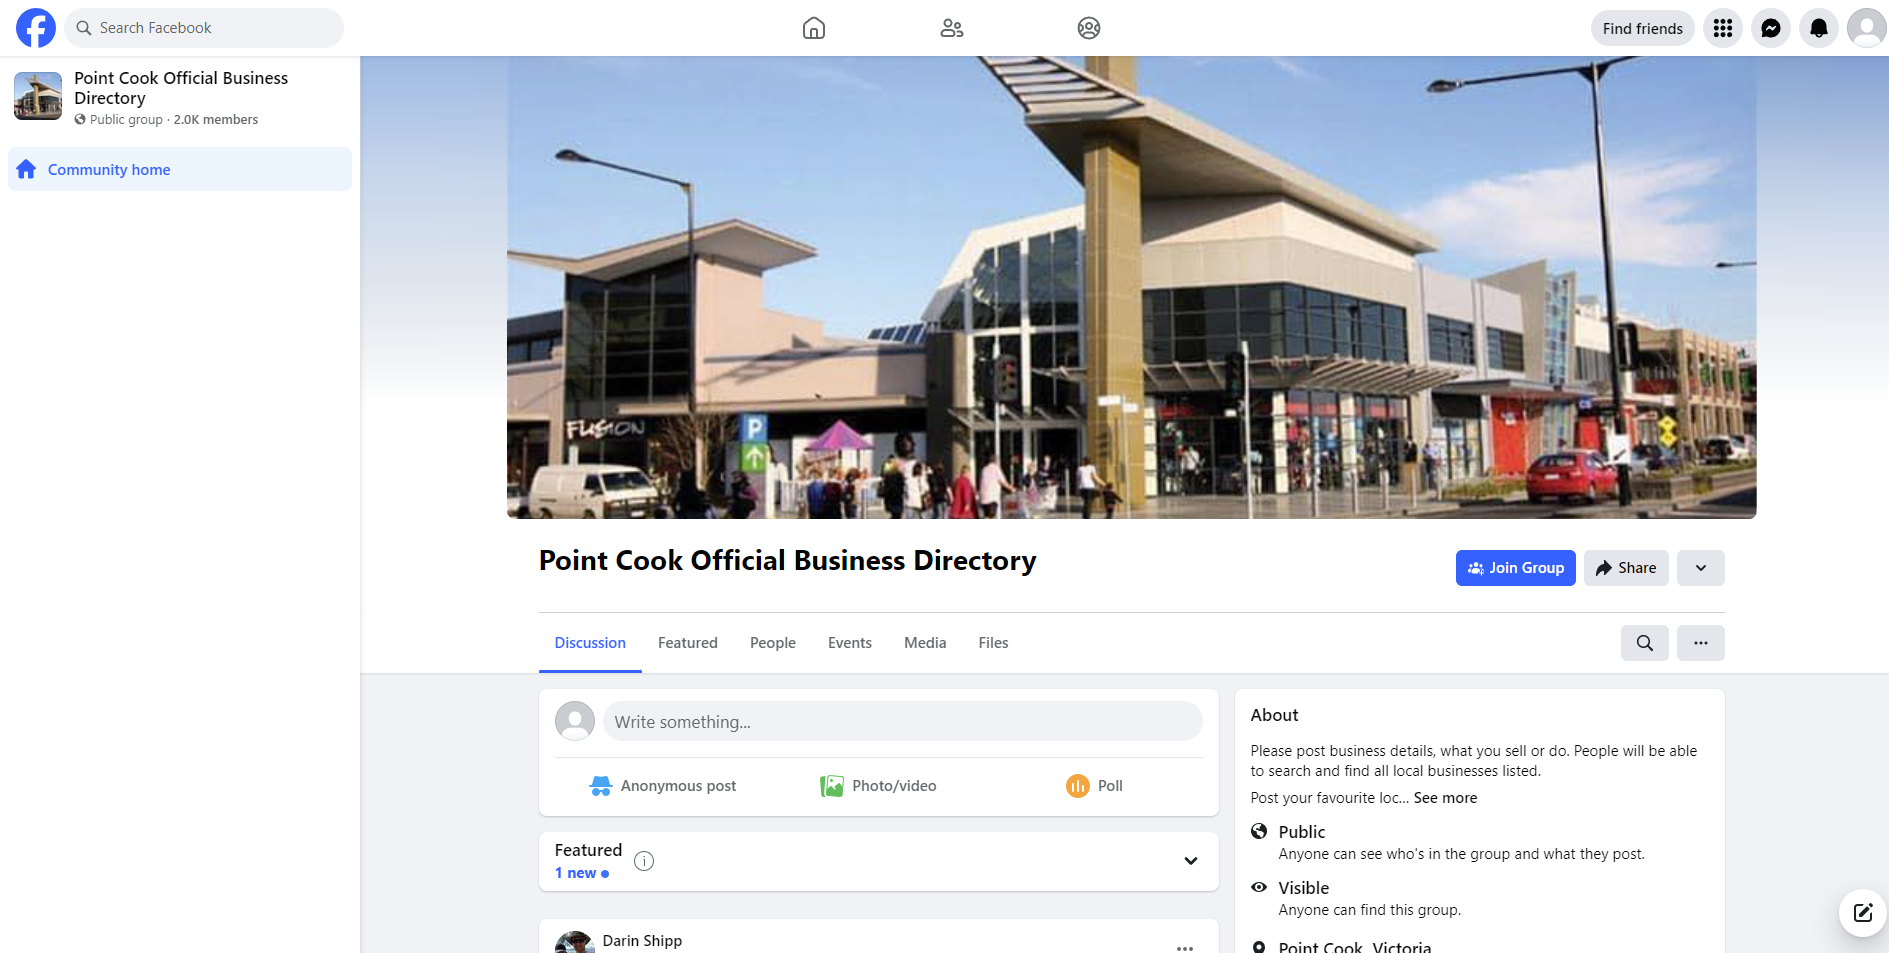 Point Cook Official Business Directory